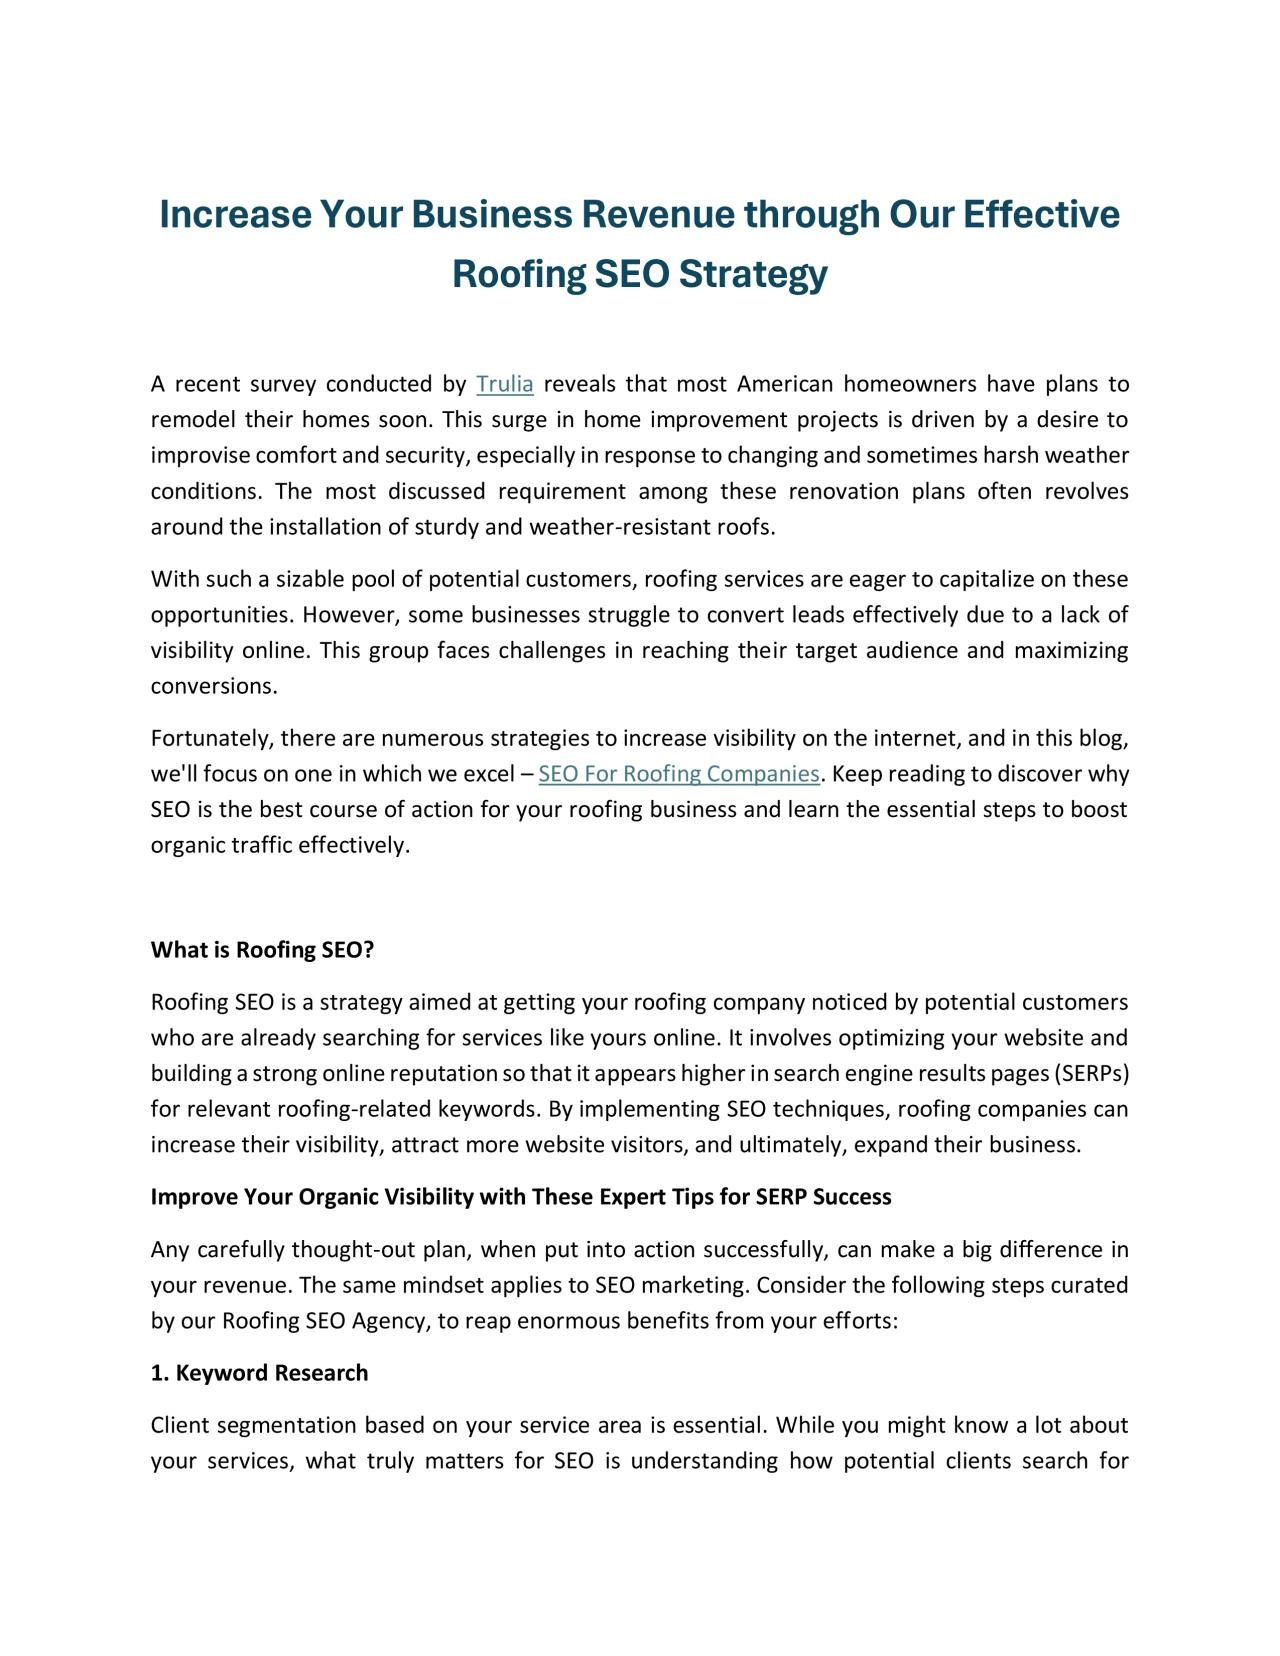 Increase Your Business Revenue through Our Effective Roofing SEO Strategy